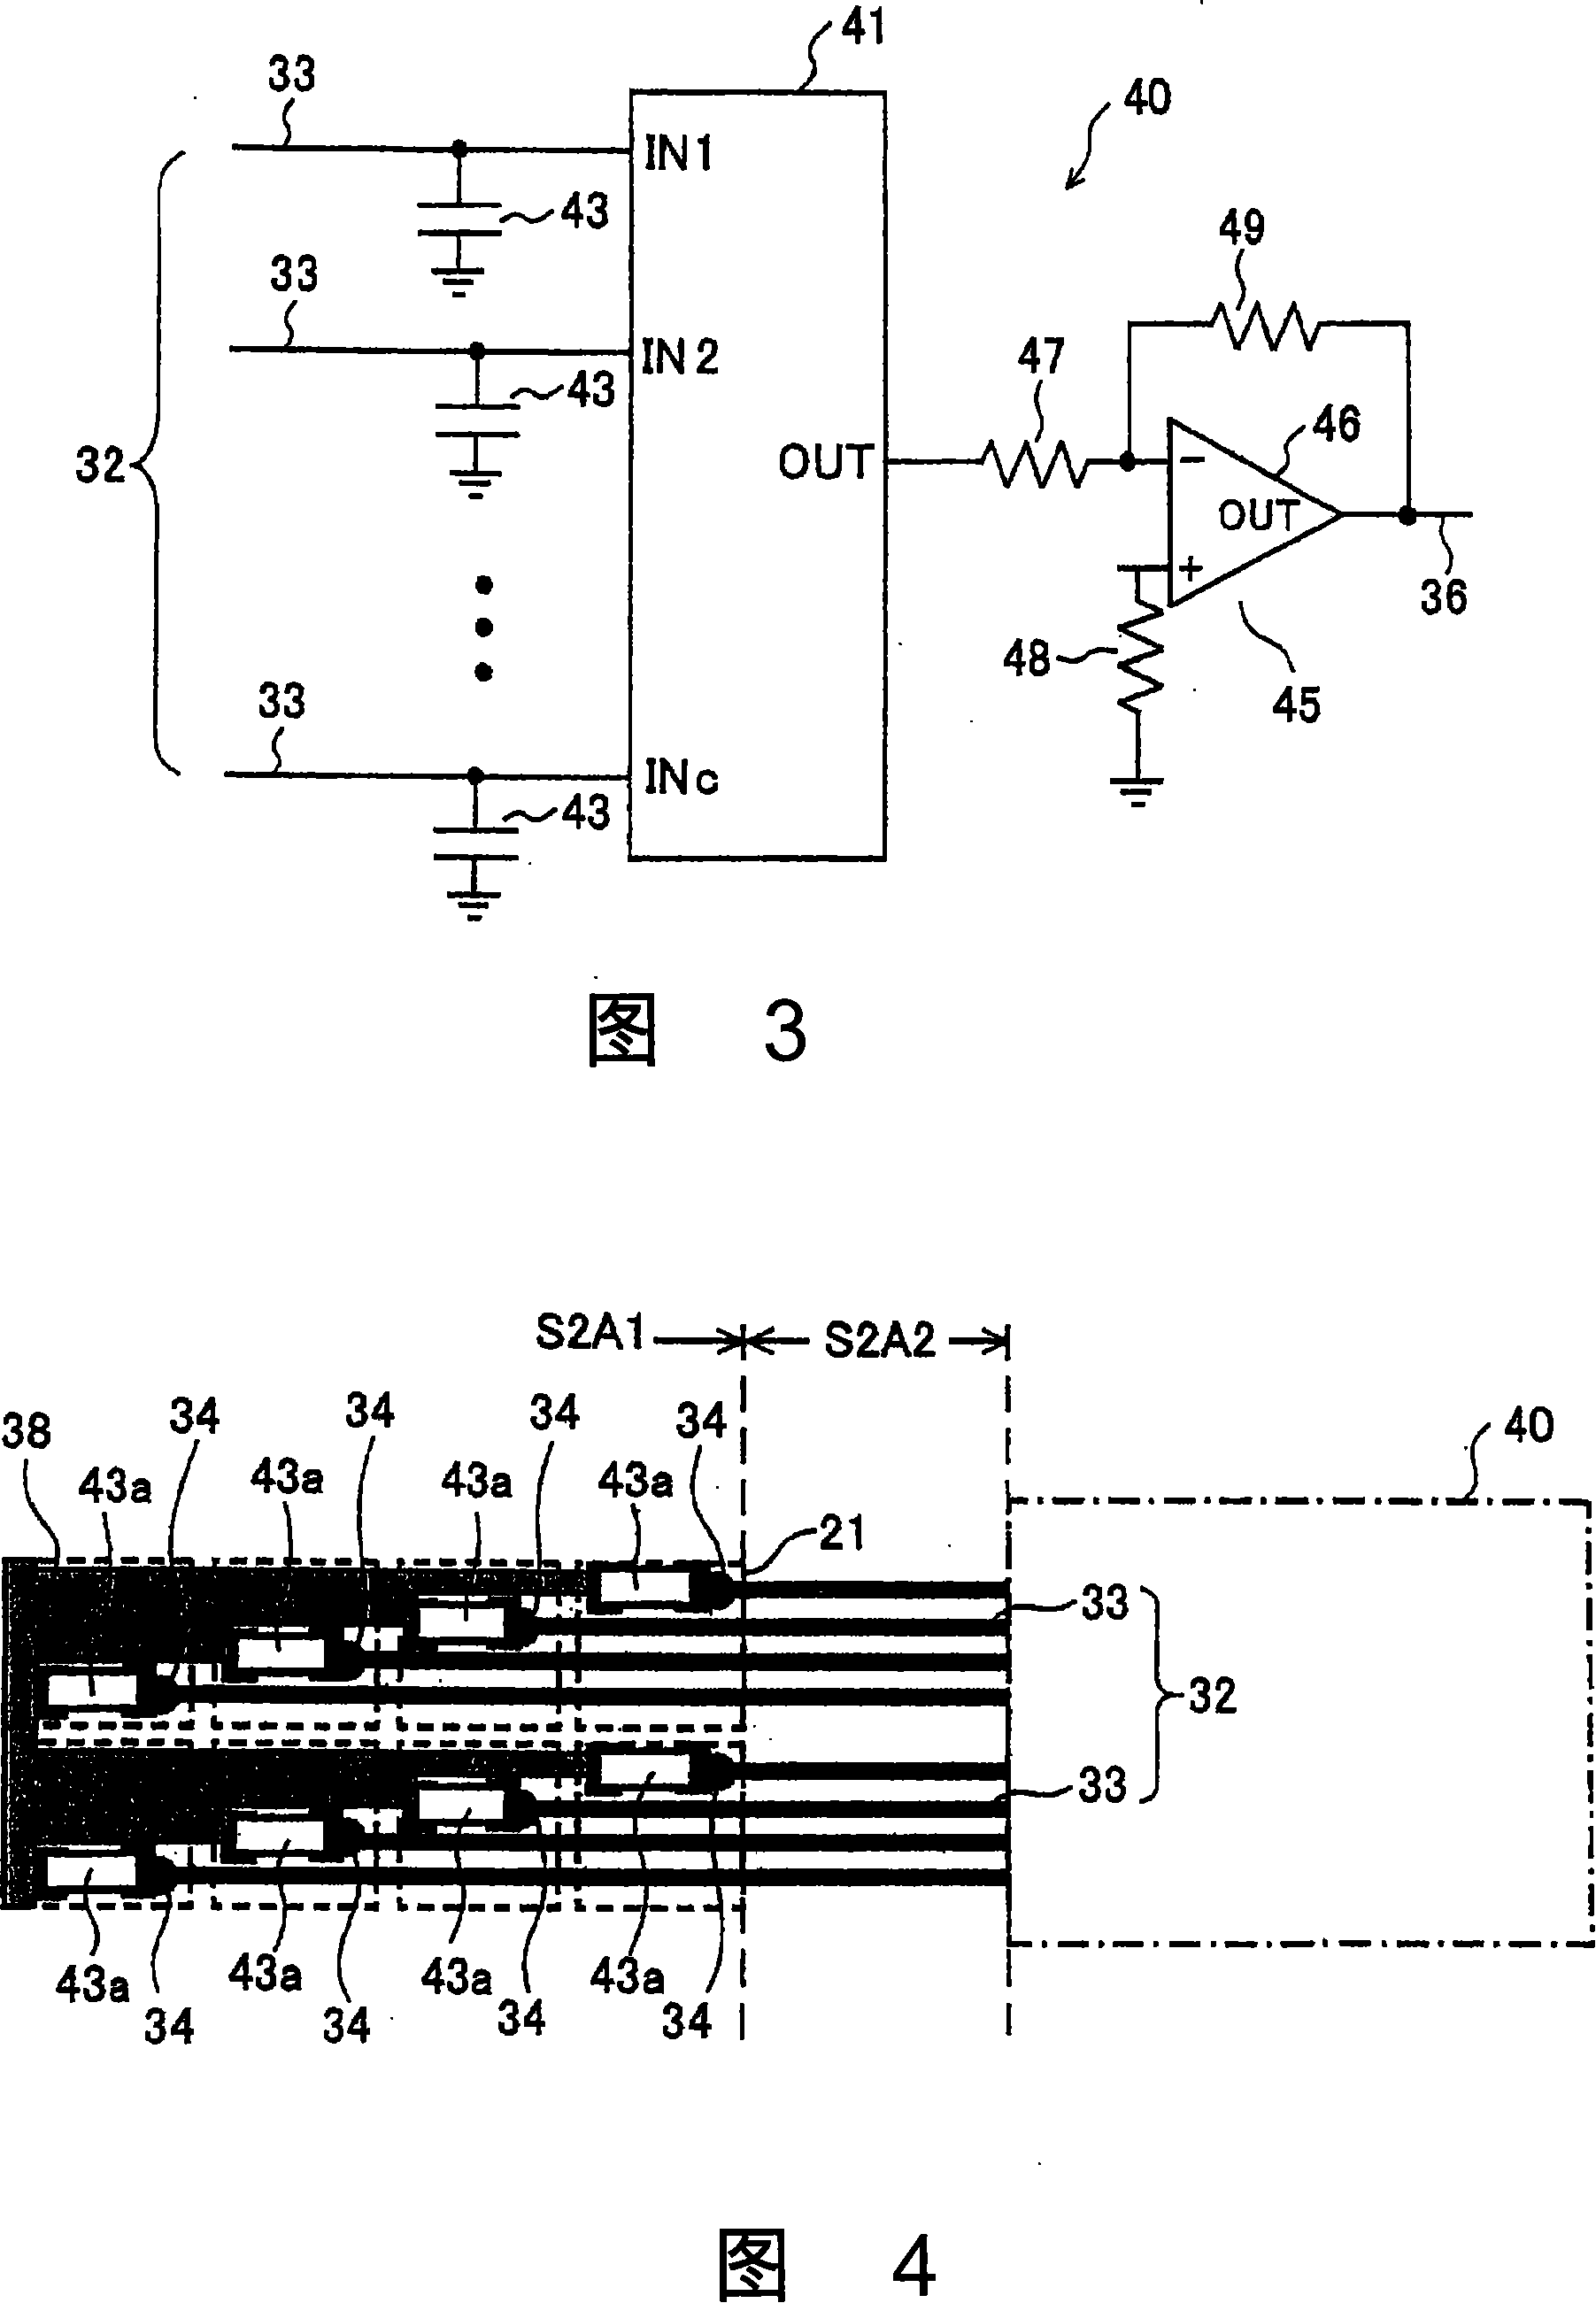 Dosimetry device for charged particle radiation